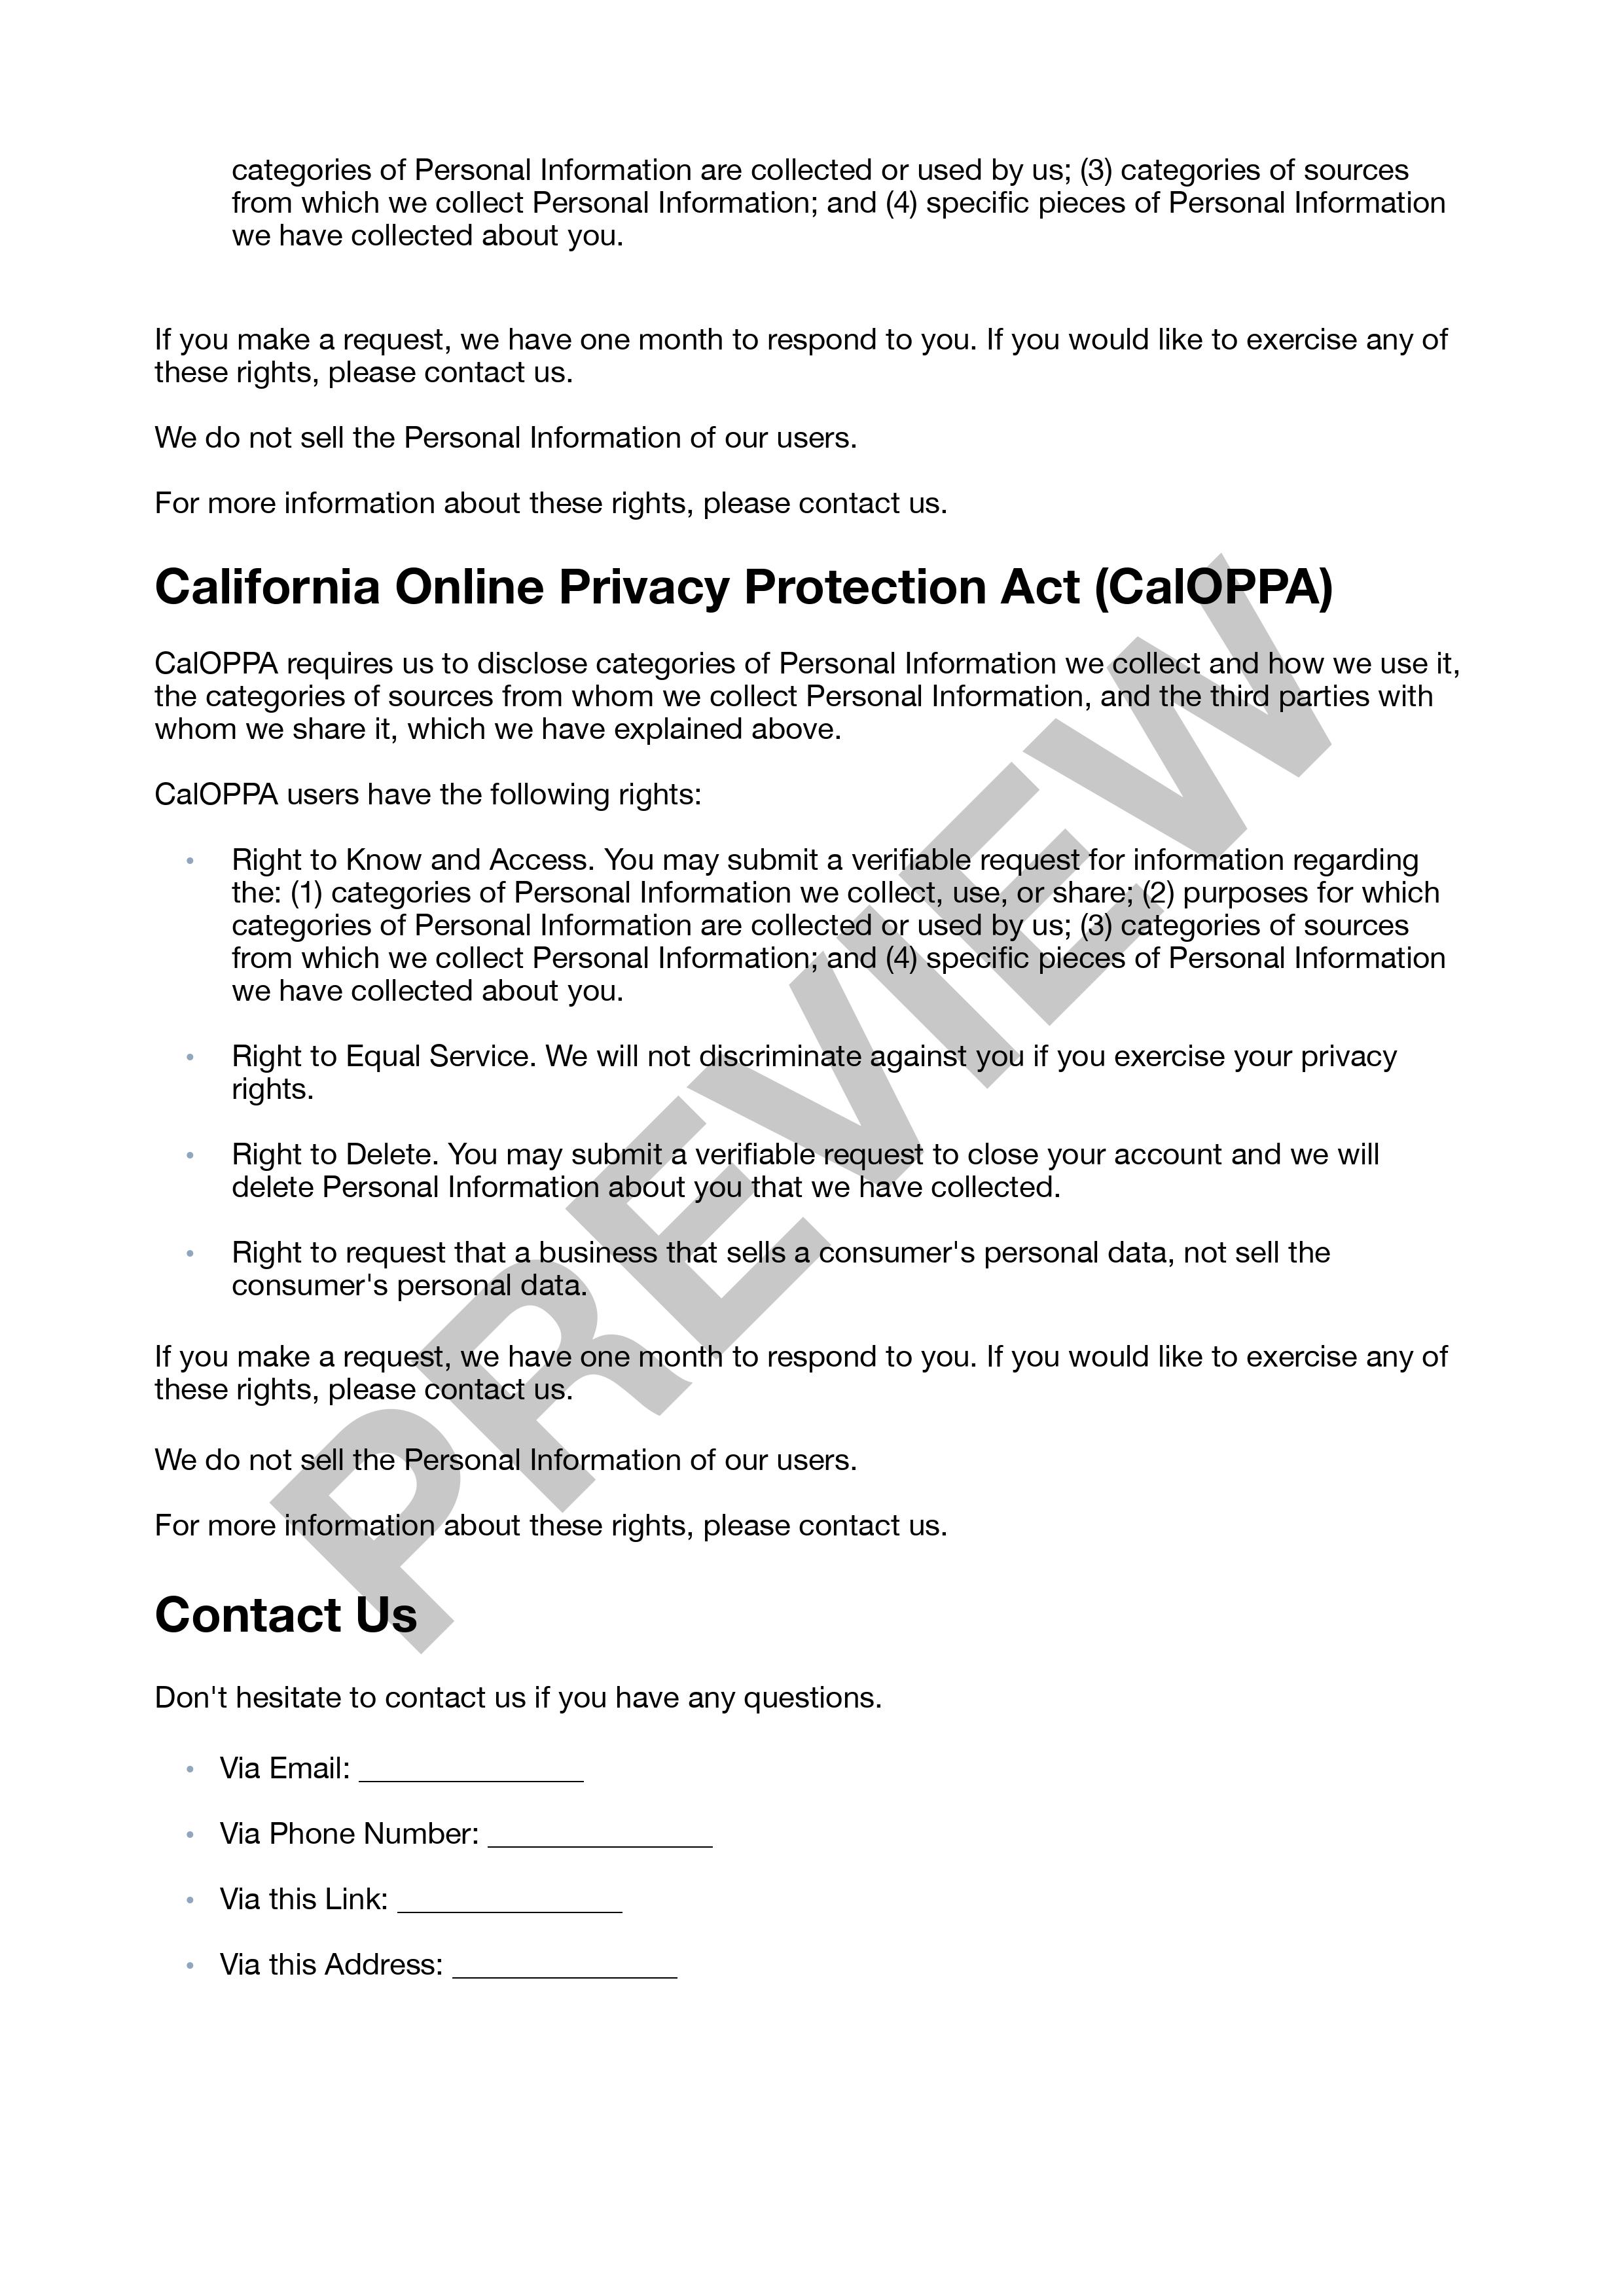 Preview Privacy Policies